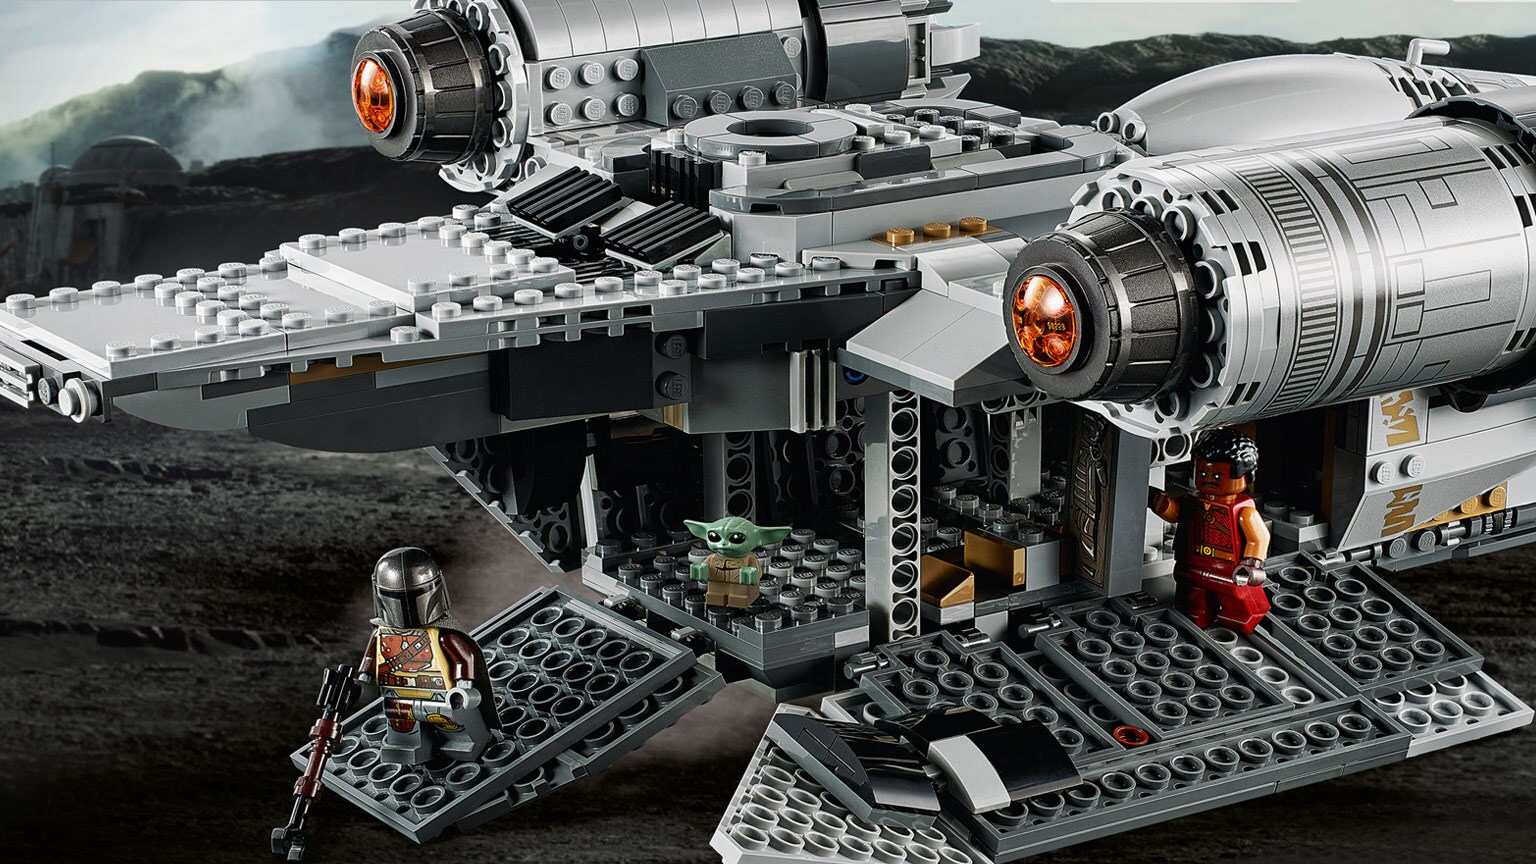 The Last Jedi LEGO Sets: First Look for Force Friday - The Joys of Boys